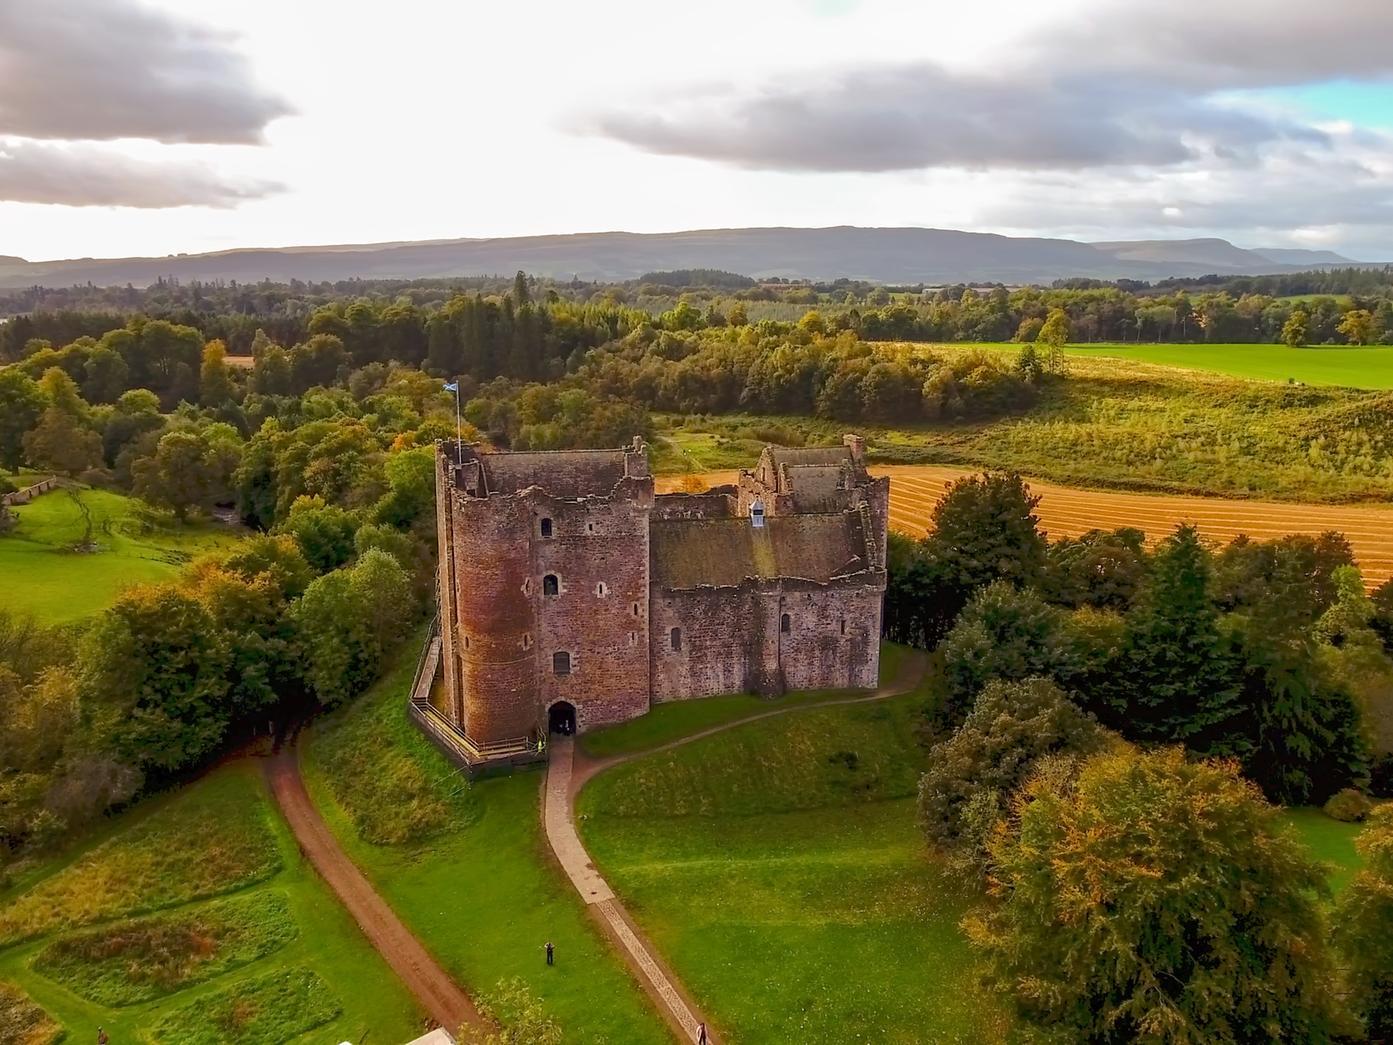 The 14th century Doune Castle, located in Stronghold, was the filming location for several scenes in Monty Python and the Holy Grail.